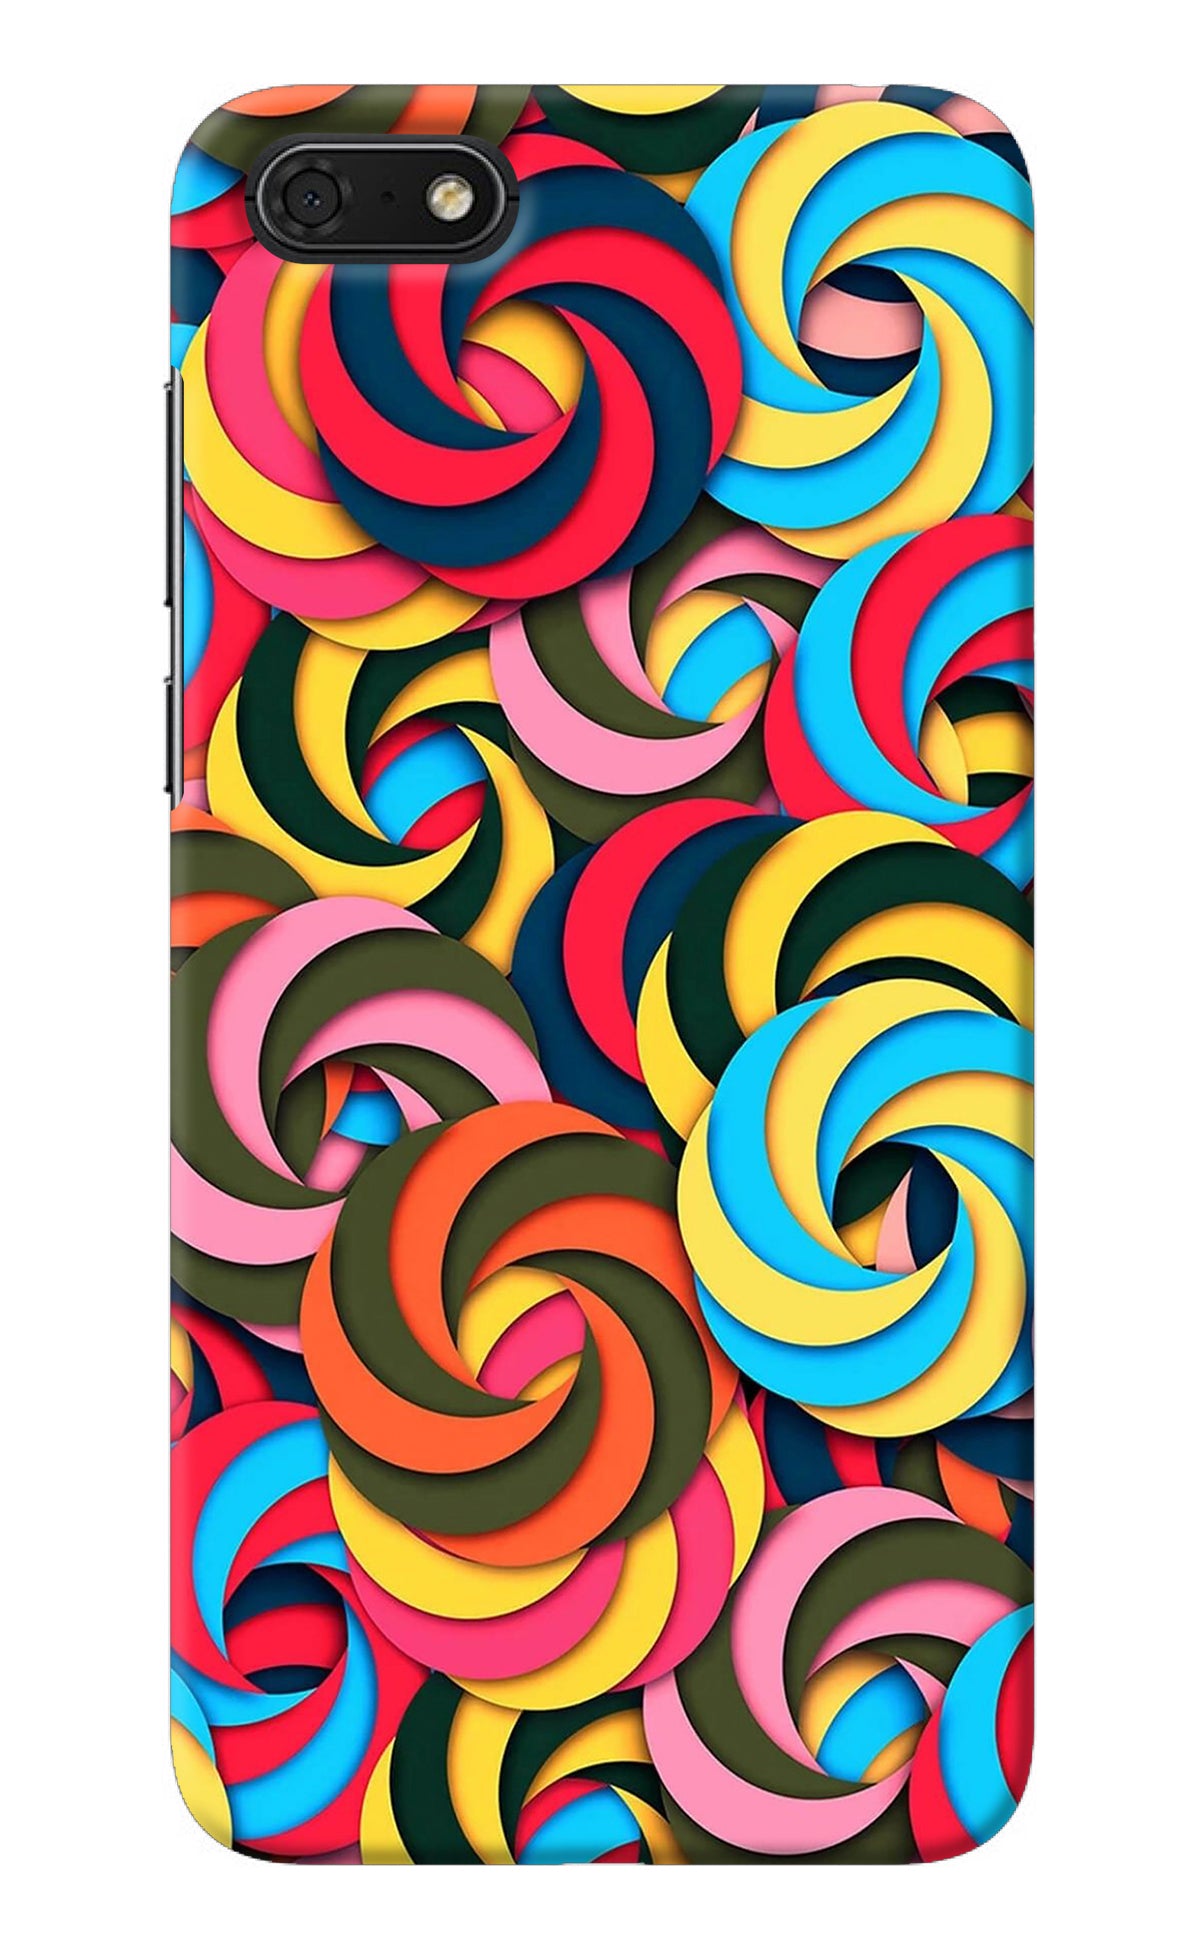 Spiral Pattern Honor 7S Back Cover